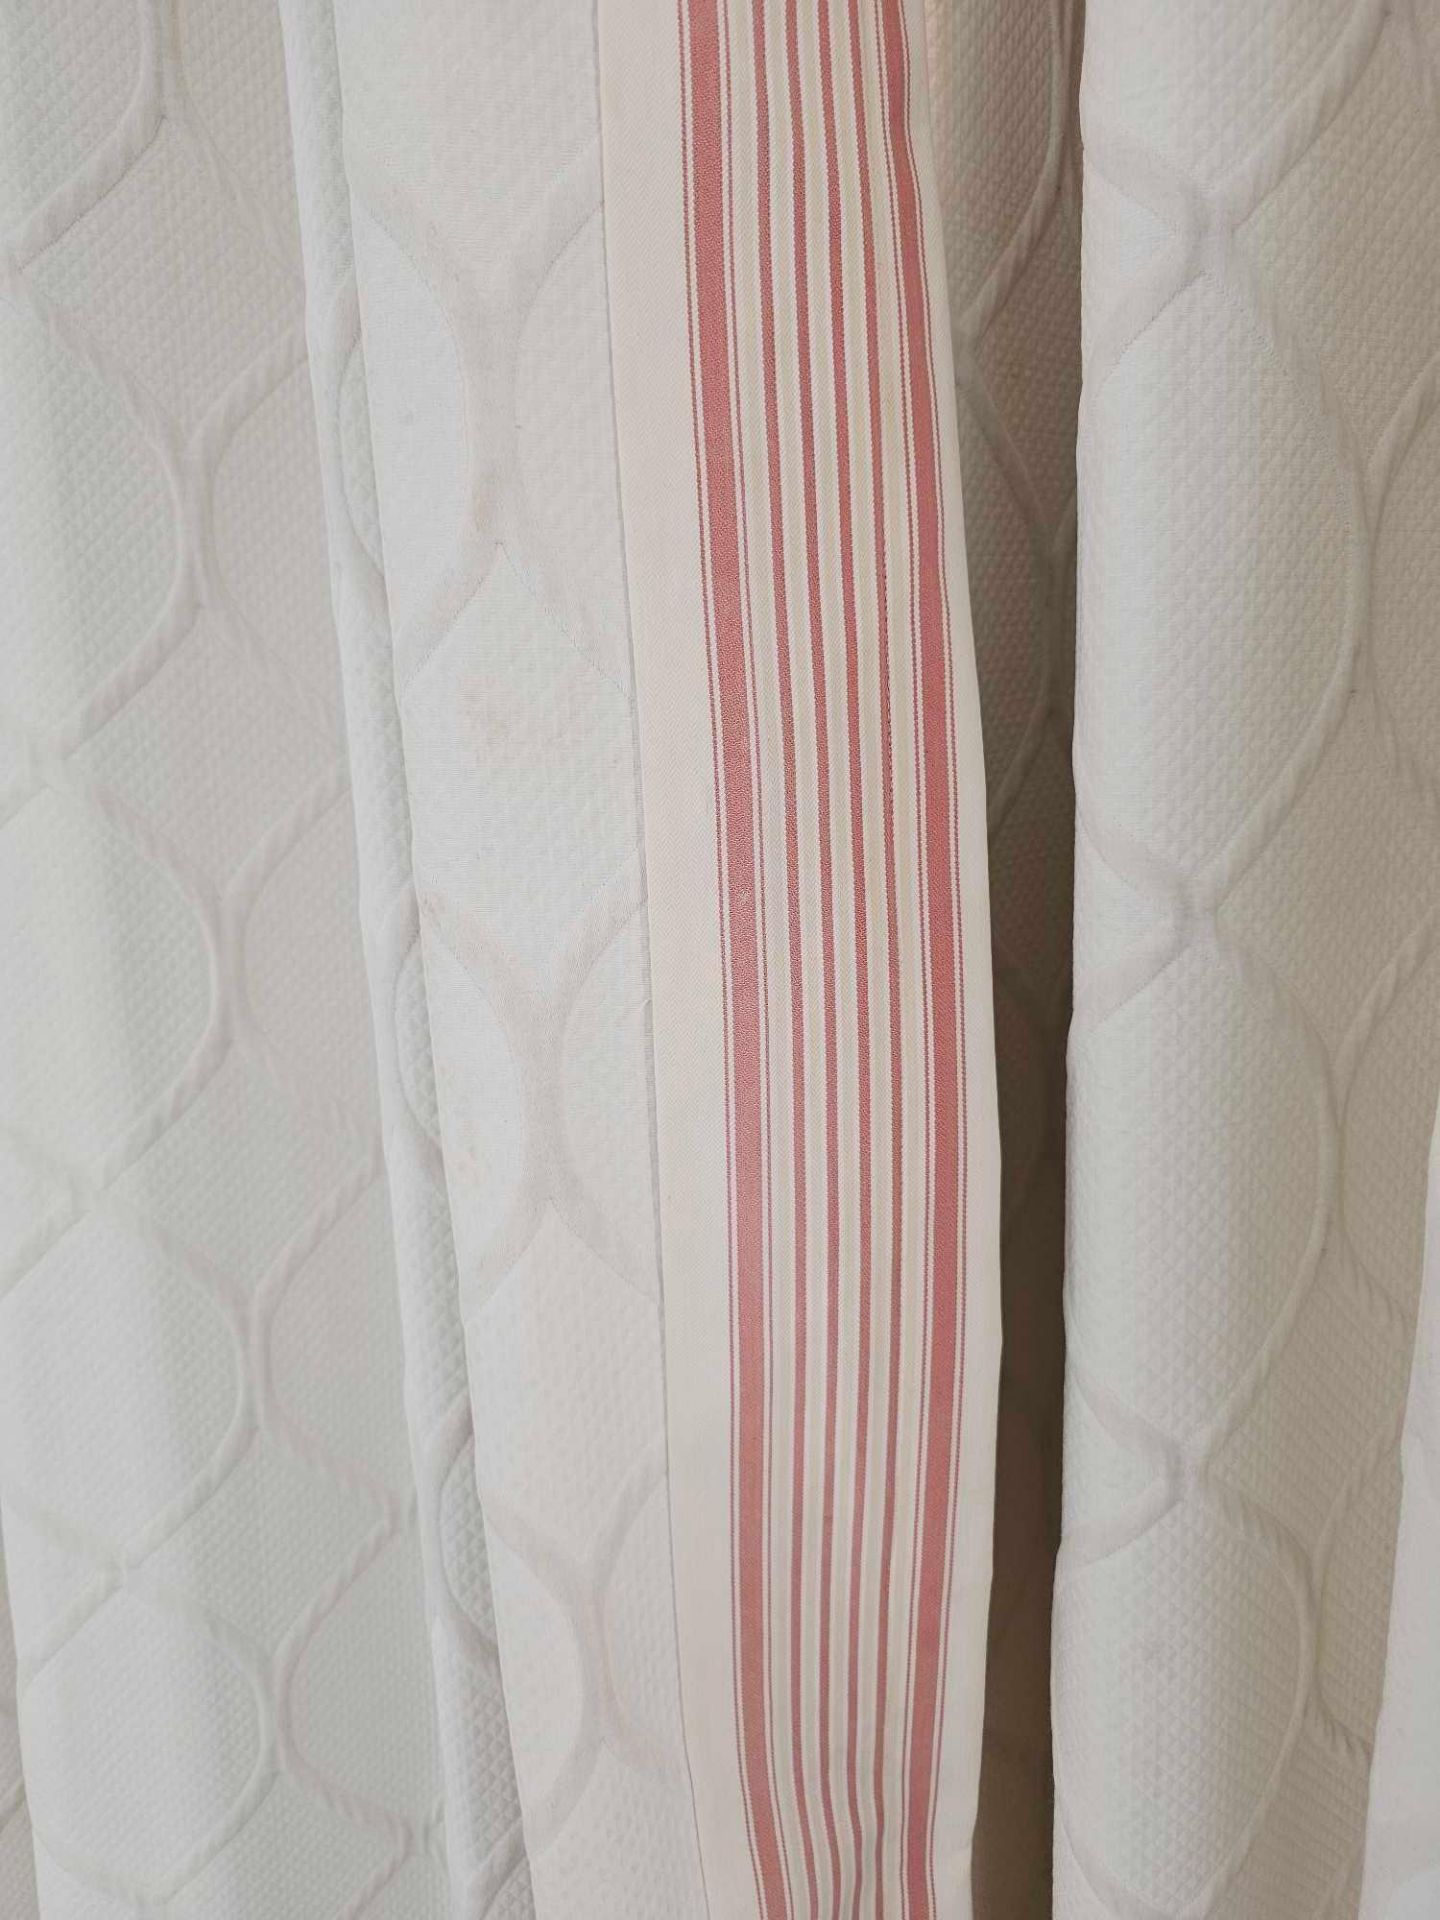 3 x Pairs Of Drapes The Cream Drapes Are A Magnificent Addition To Any Home, Draped From Ceiling - Image 3 of 4